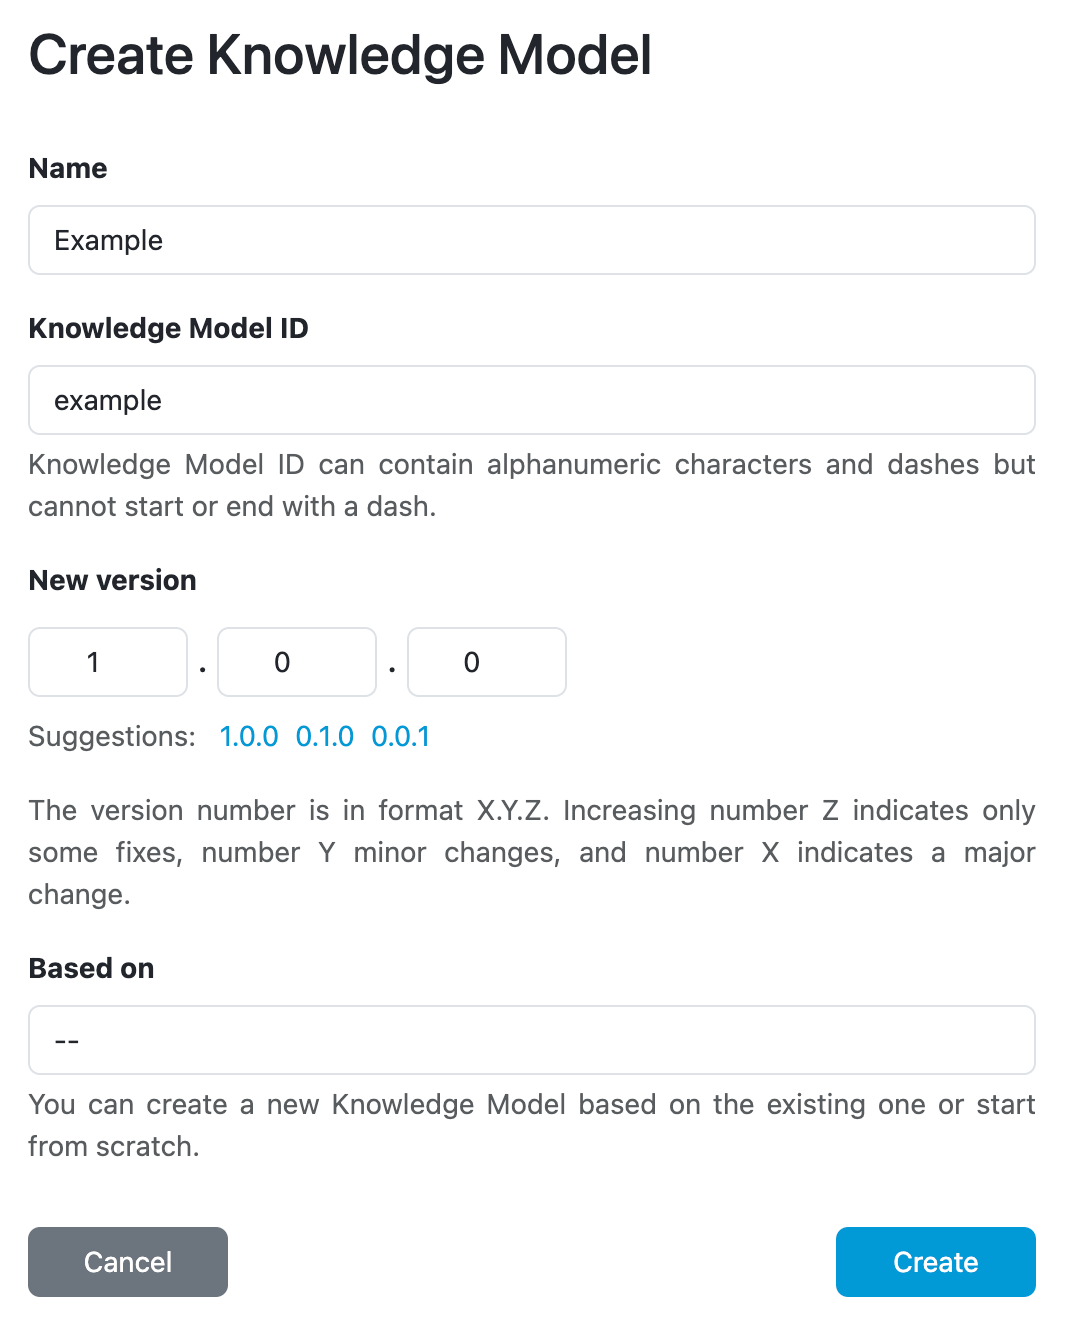 Creating the new Knowledge Model Editor